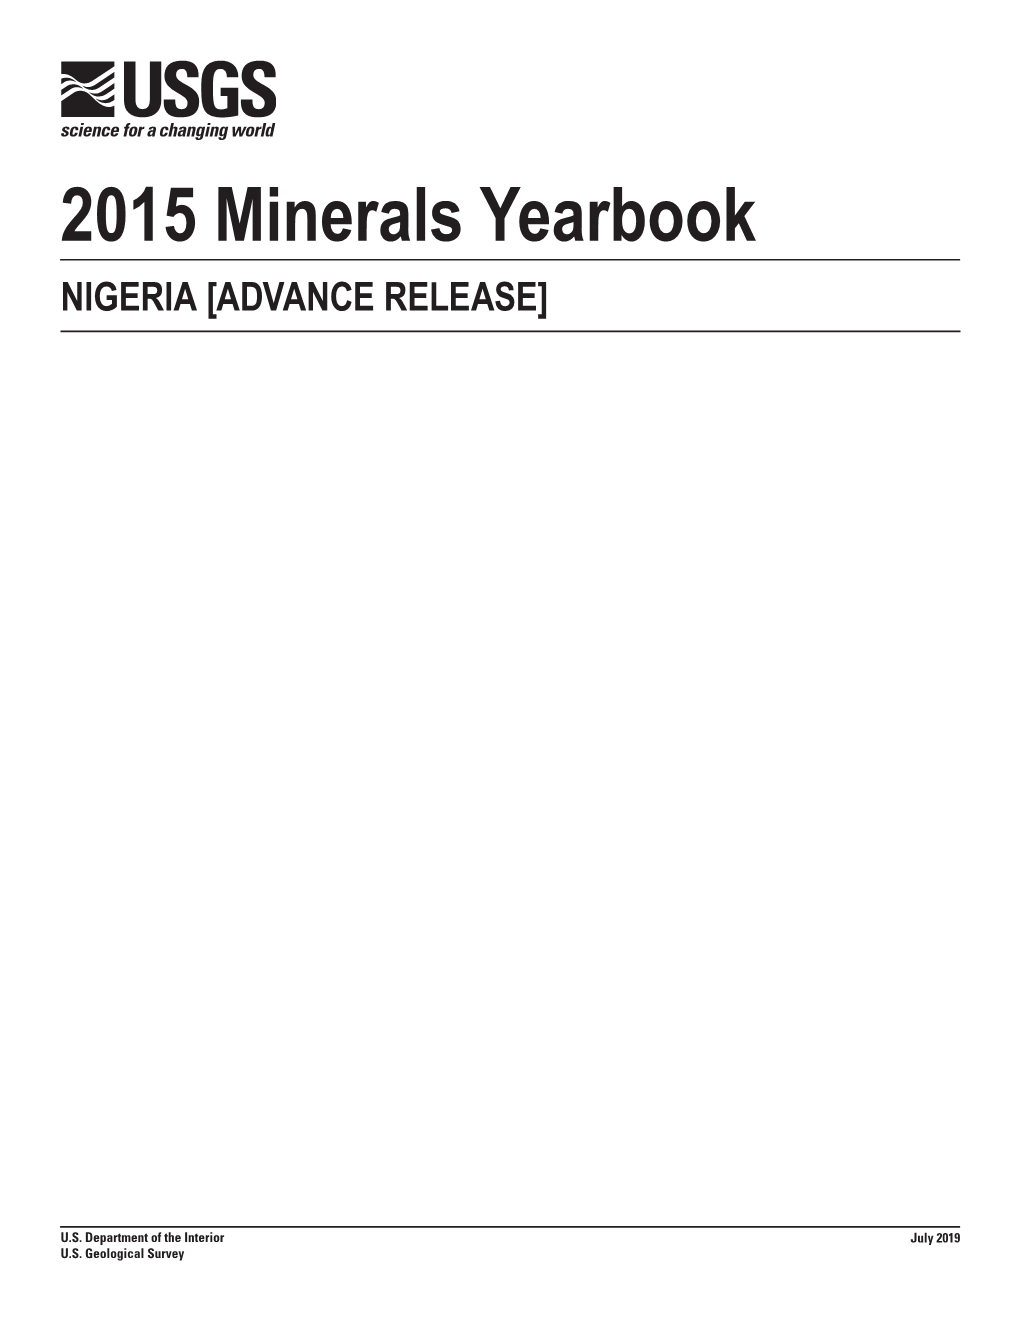 The Mineral Industry of Nigeria in 2015